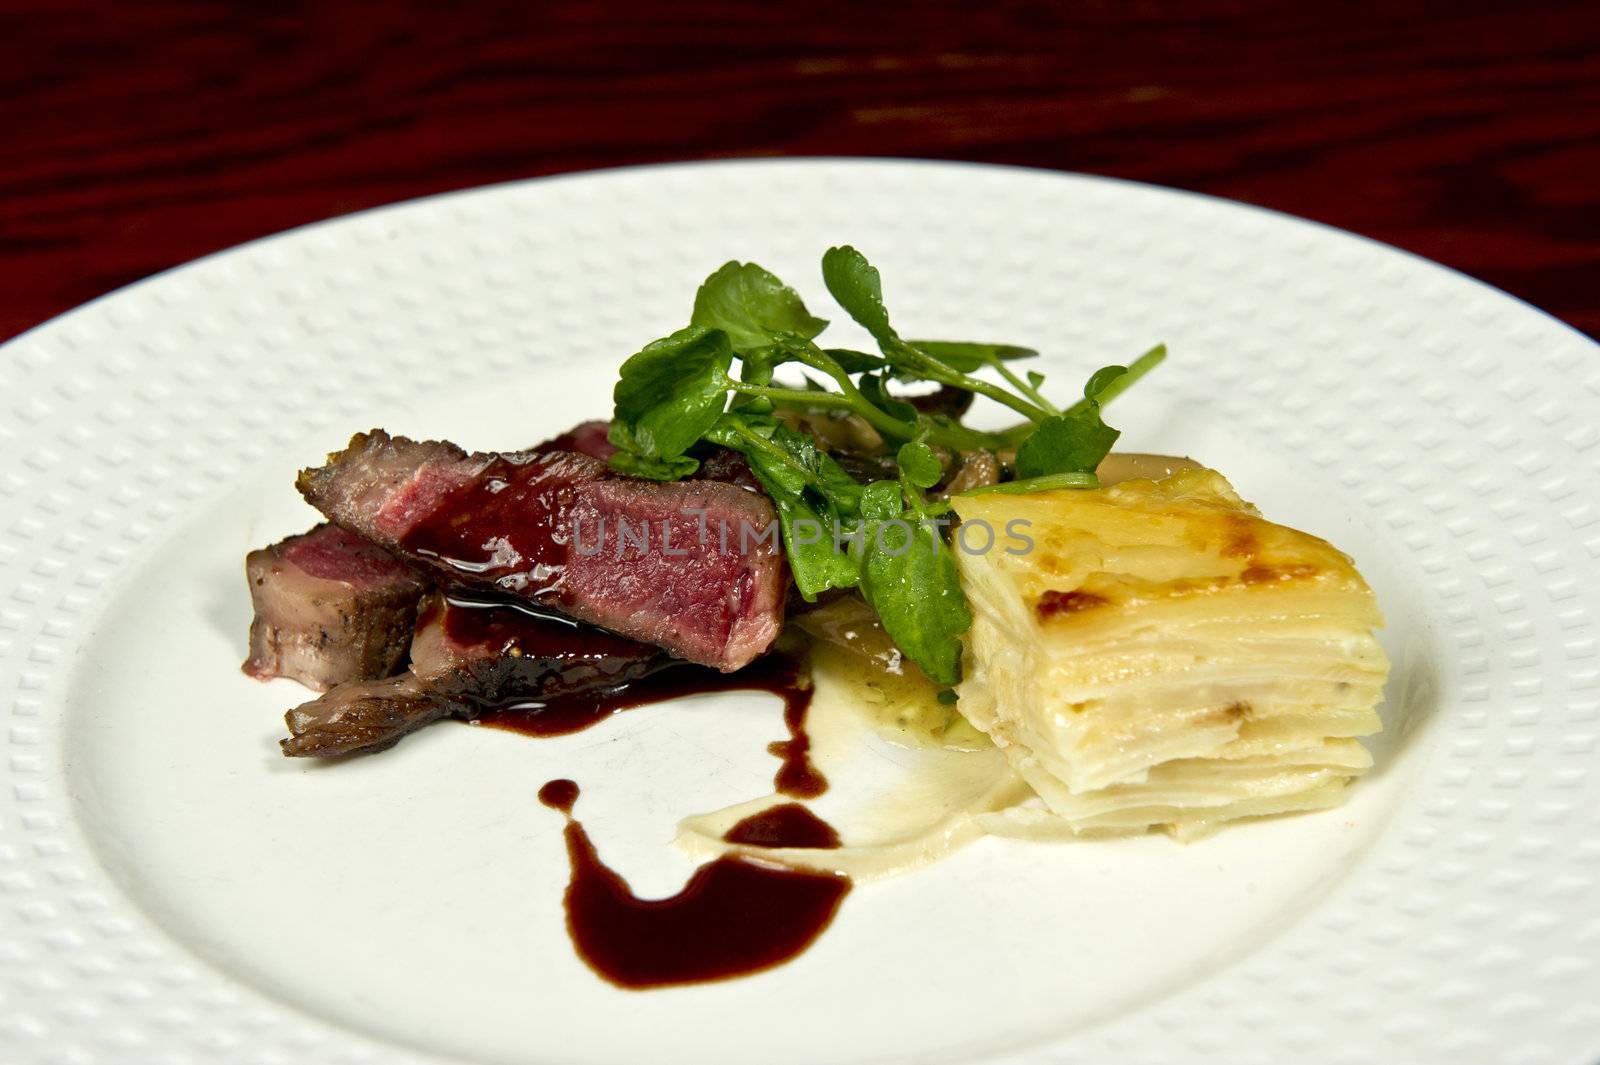 Image of a gourmet steak and potato dish